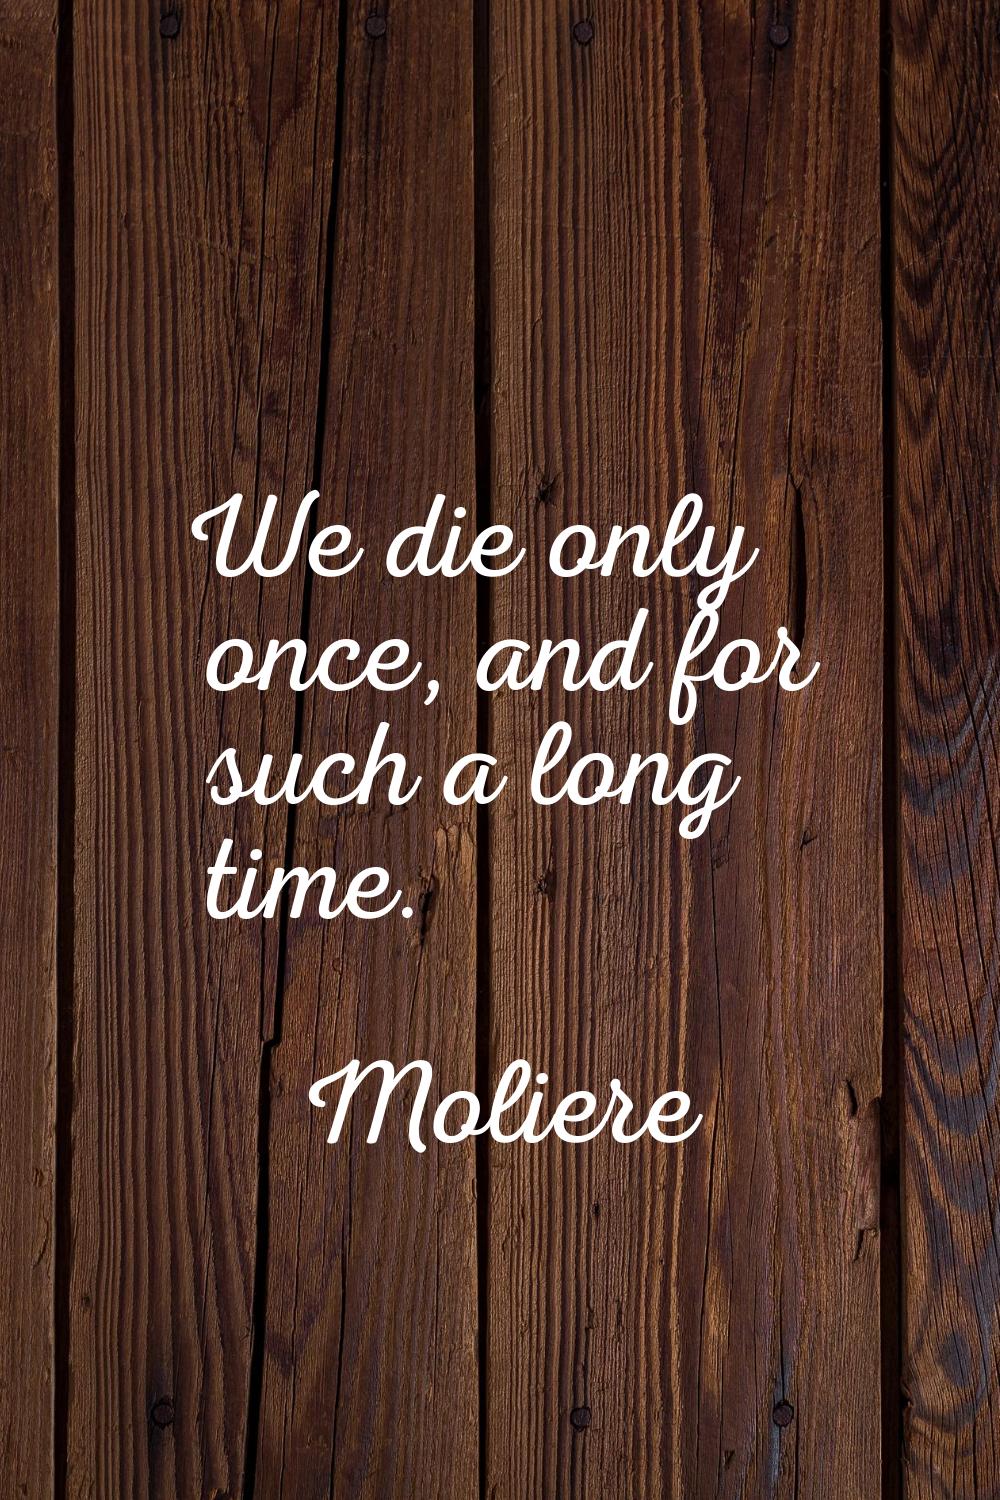 We die only once, and for such a long time.